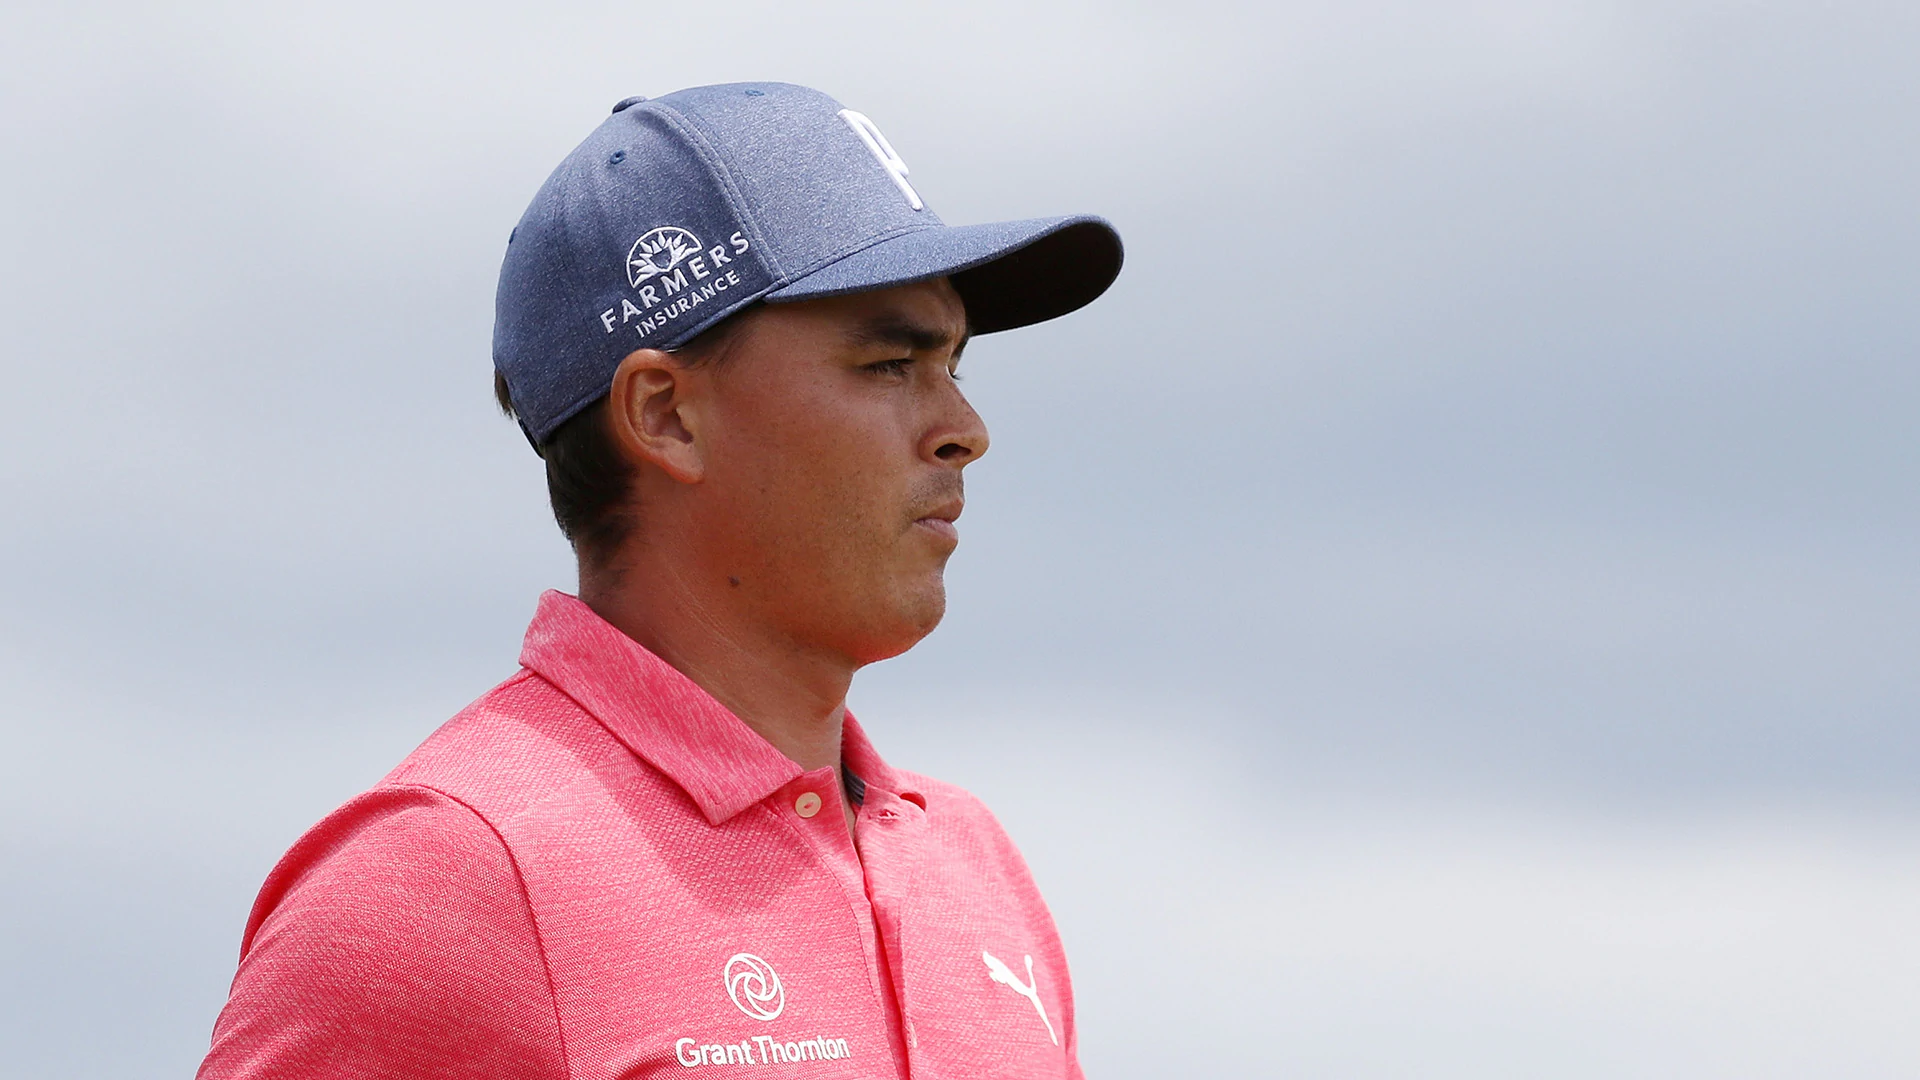 After Masters runner-up, Fowler in mix at U.S. Open